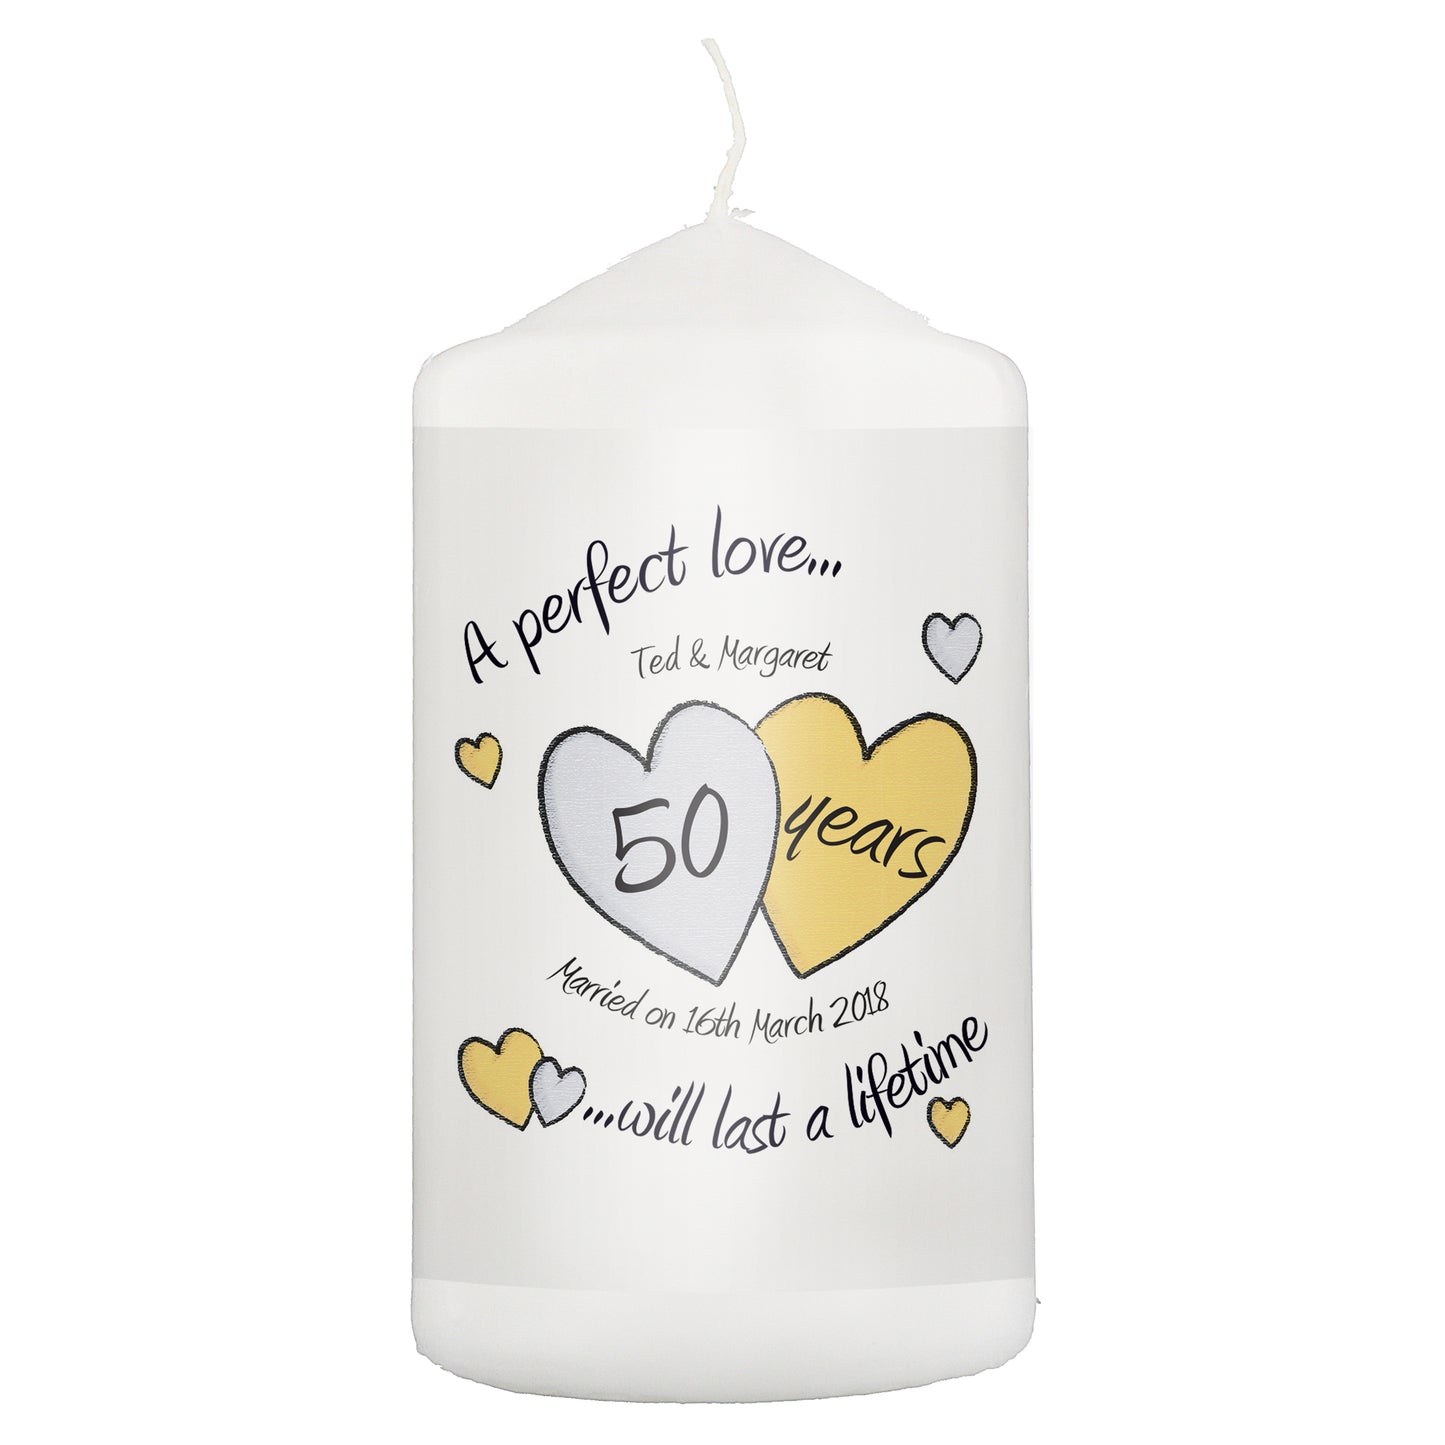 Personalised A Perfect Love Golden Anniversary Candle - Personalise It!